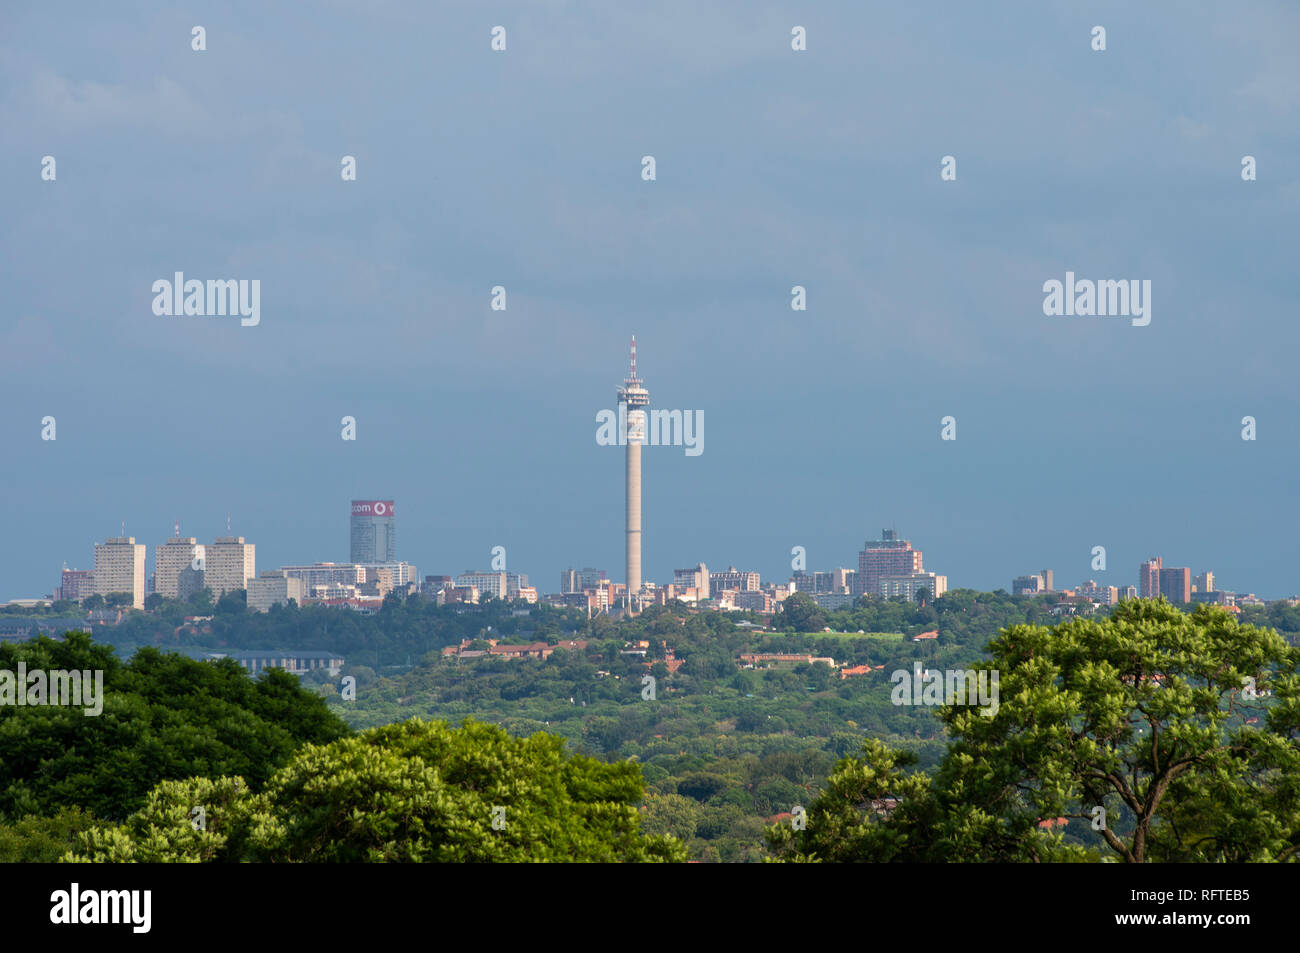 Johannesburg, South Africa. 26th Jan, 2019. Rain clouds roll in over the tree-lined Johannesburg skyline, late Saturday afternoon. Credit: Eva-Lotta Jansson/Alamy Live News Stock Photo